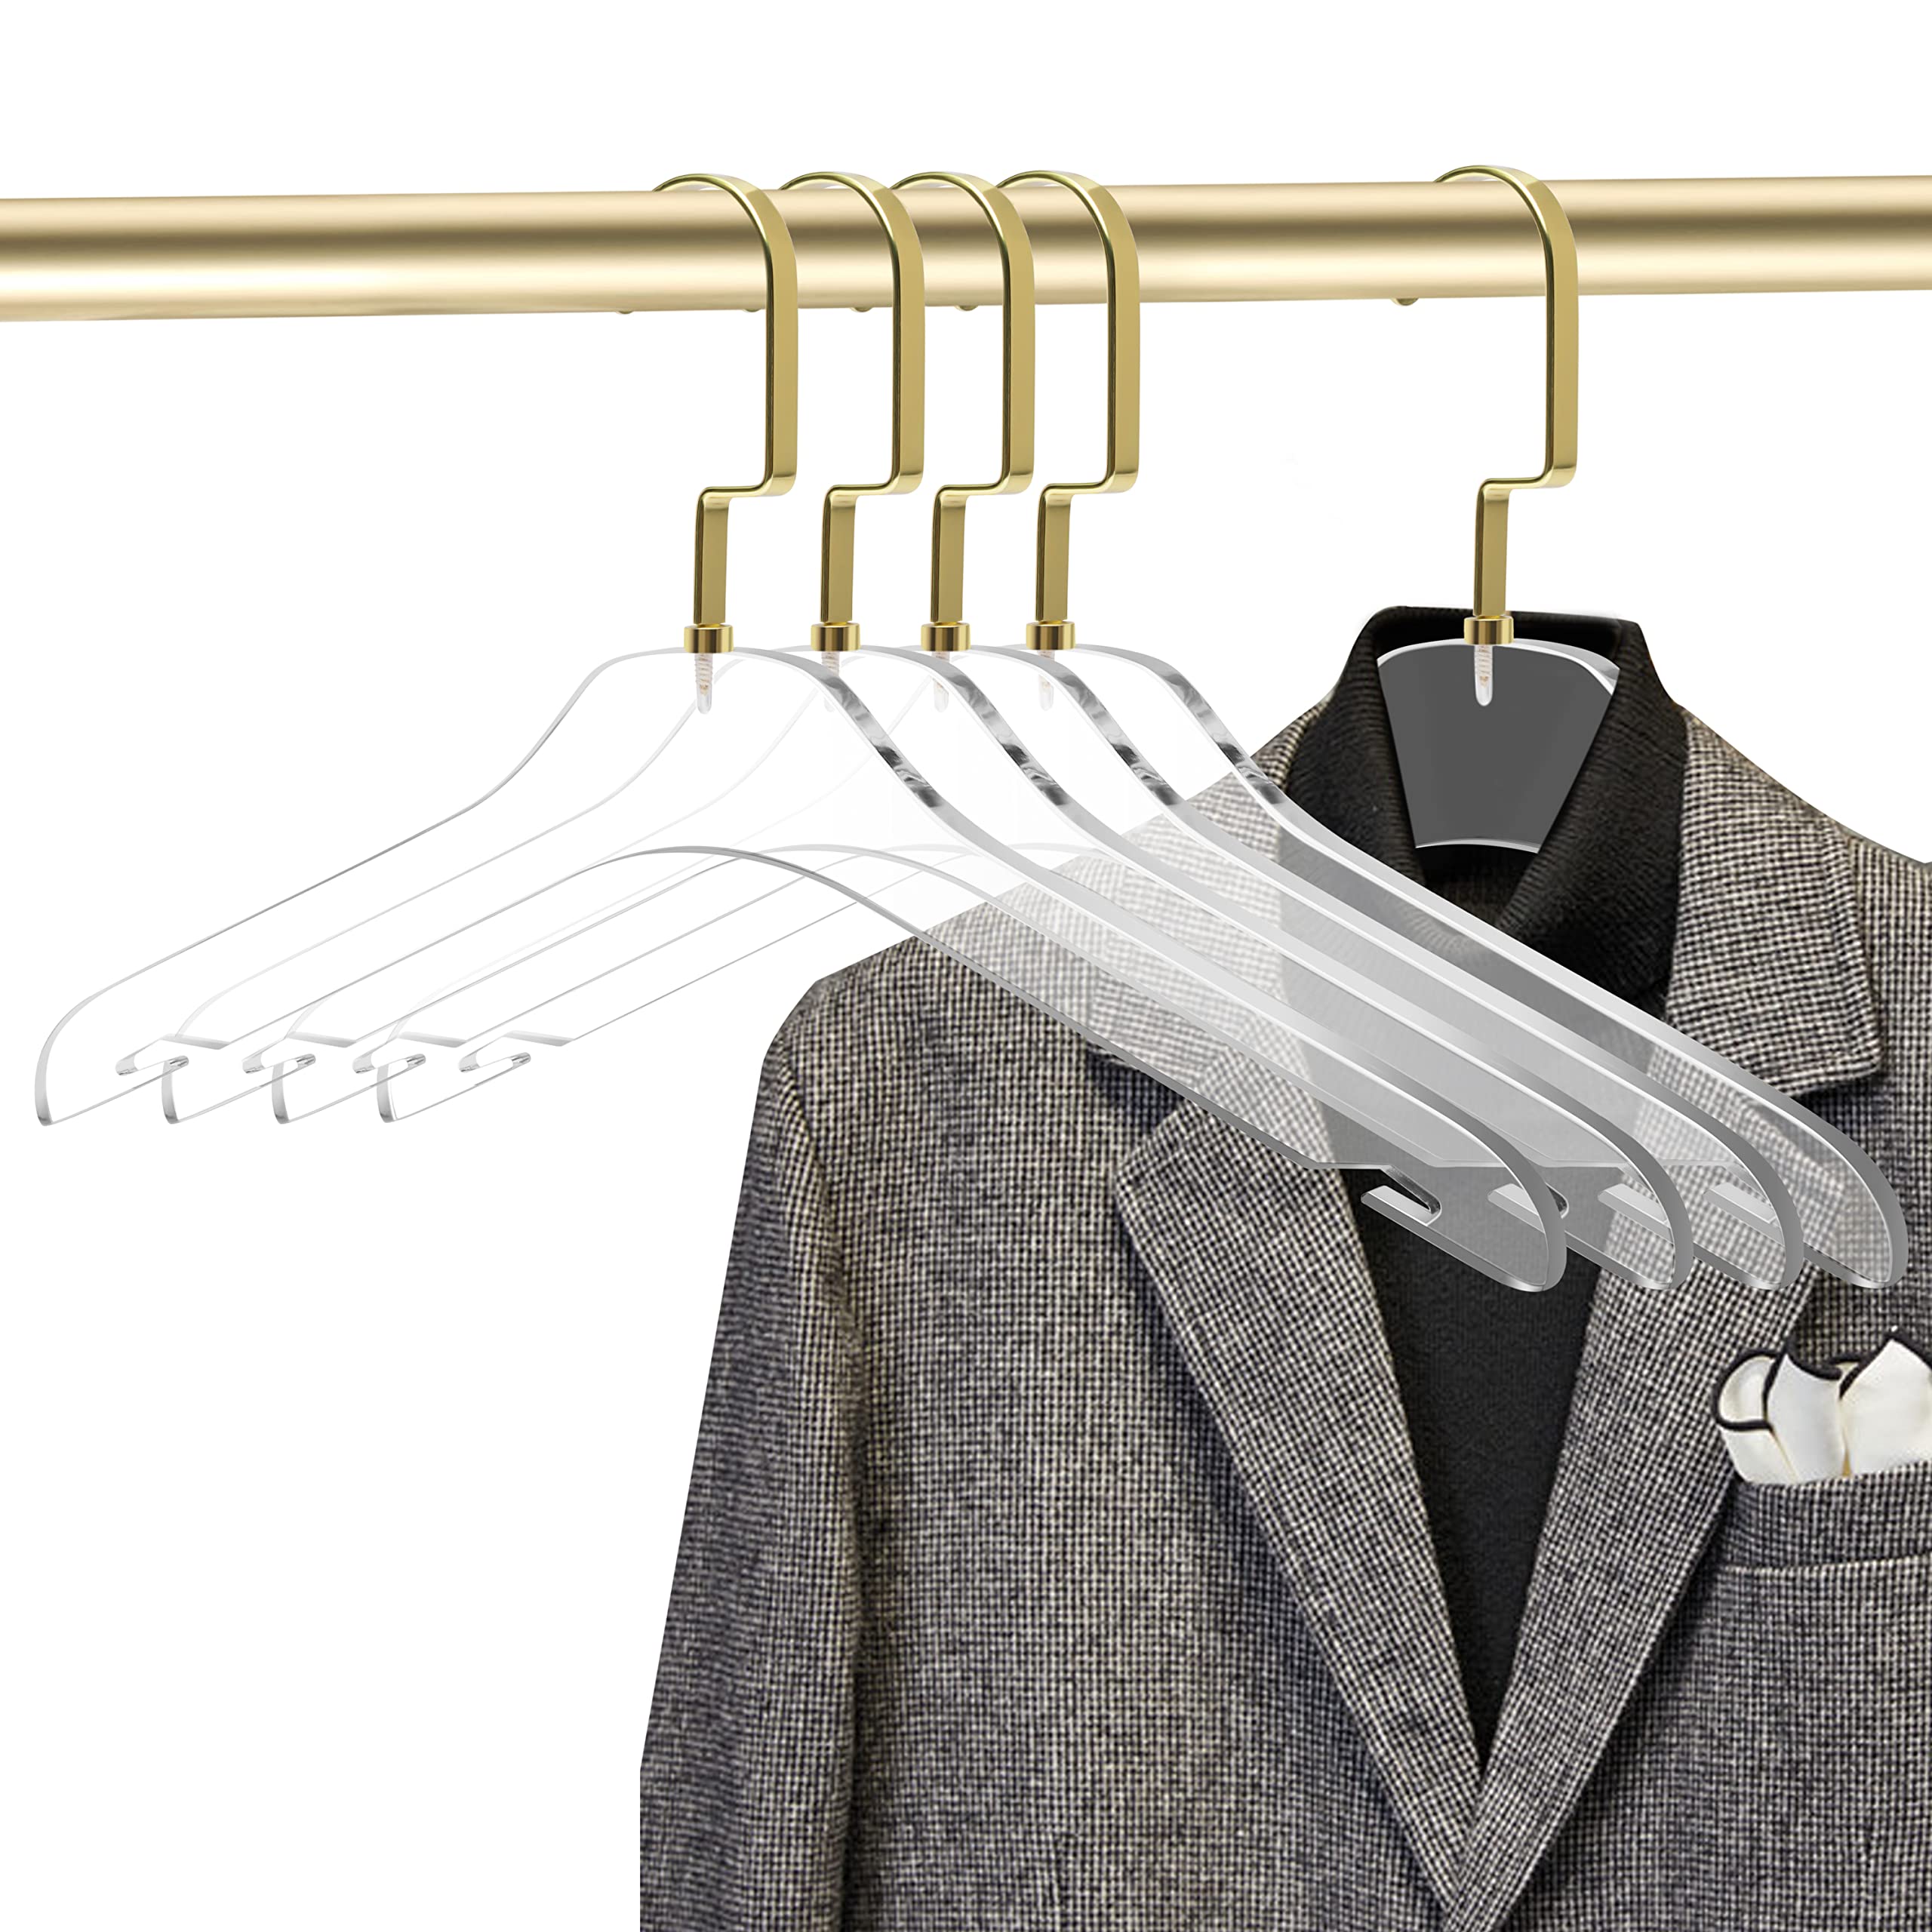 Quality Clear Acrylic Clothing Hangers – Stylish Clothes Hanger with Silver or Gold Hooks - Coat Hanger for Dress, Suit - Closet Organizer Adult Hangers - Heavy Duty and Space Saving Cloth Hangers  - Like New